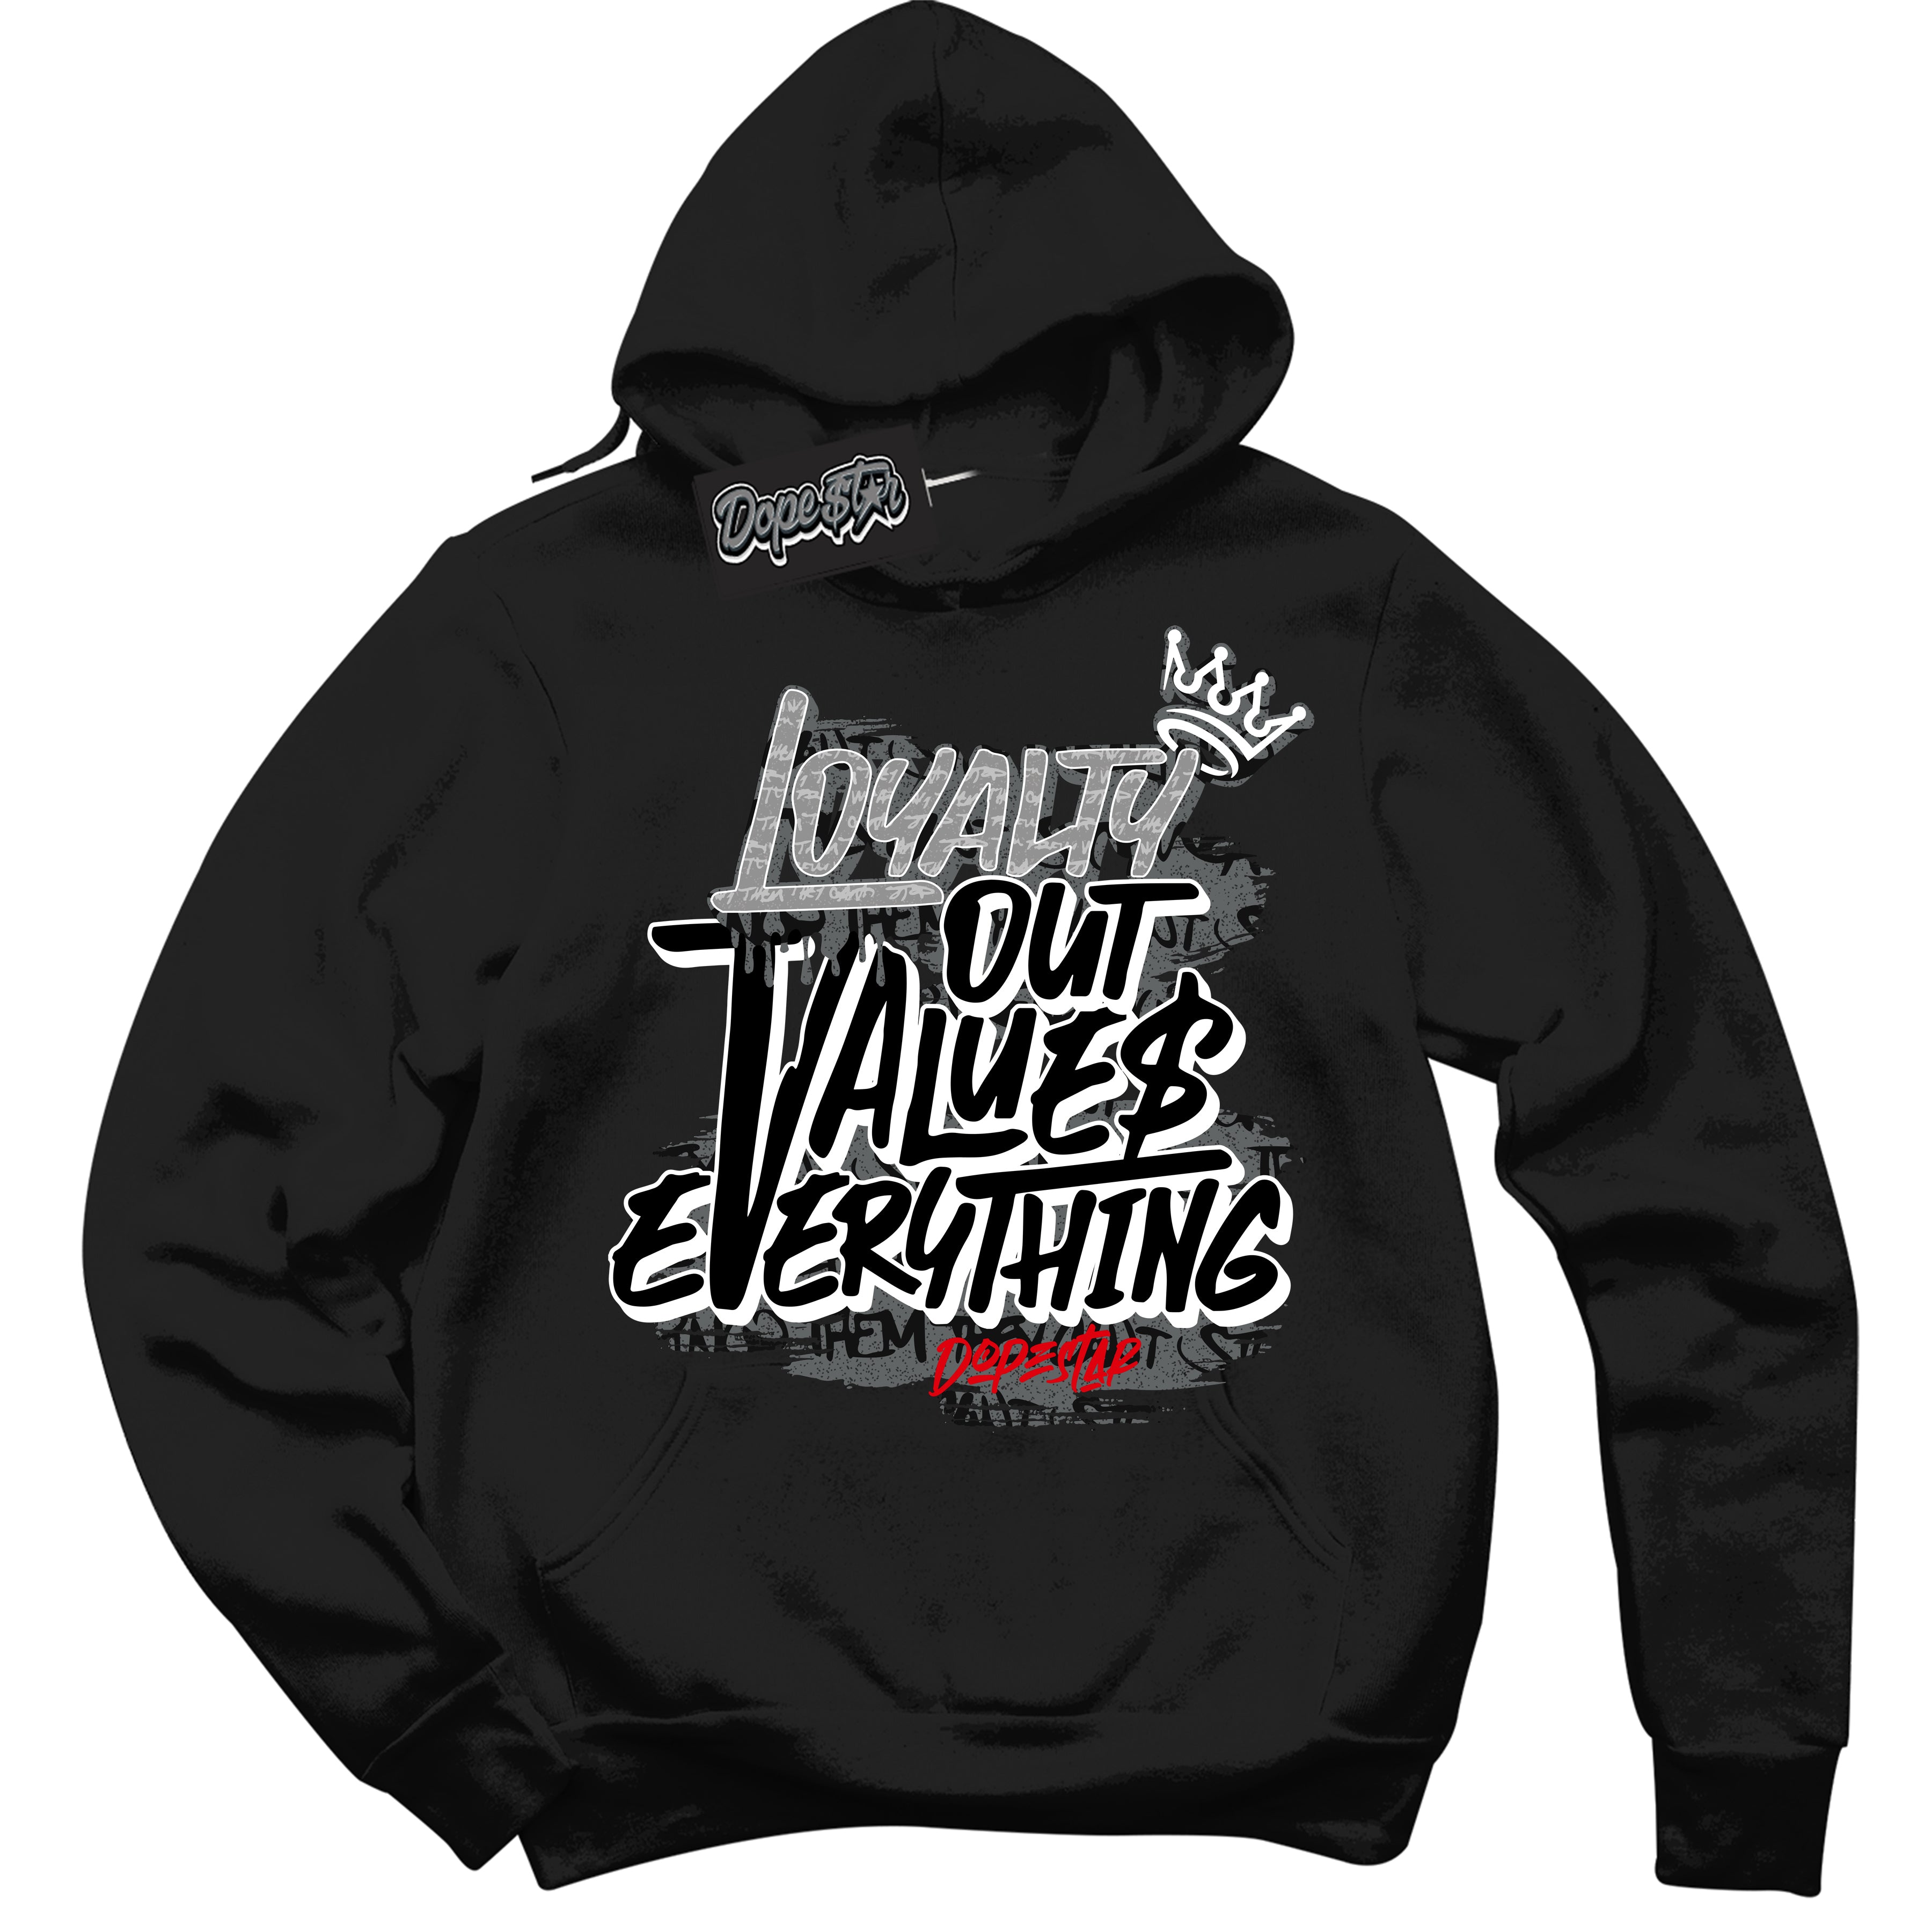 Cool Black Hoodie with “ Loyalty Out Values Everything ”  design that Perfectly Matches  Rebellionaire 1s Sneakers.